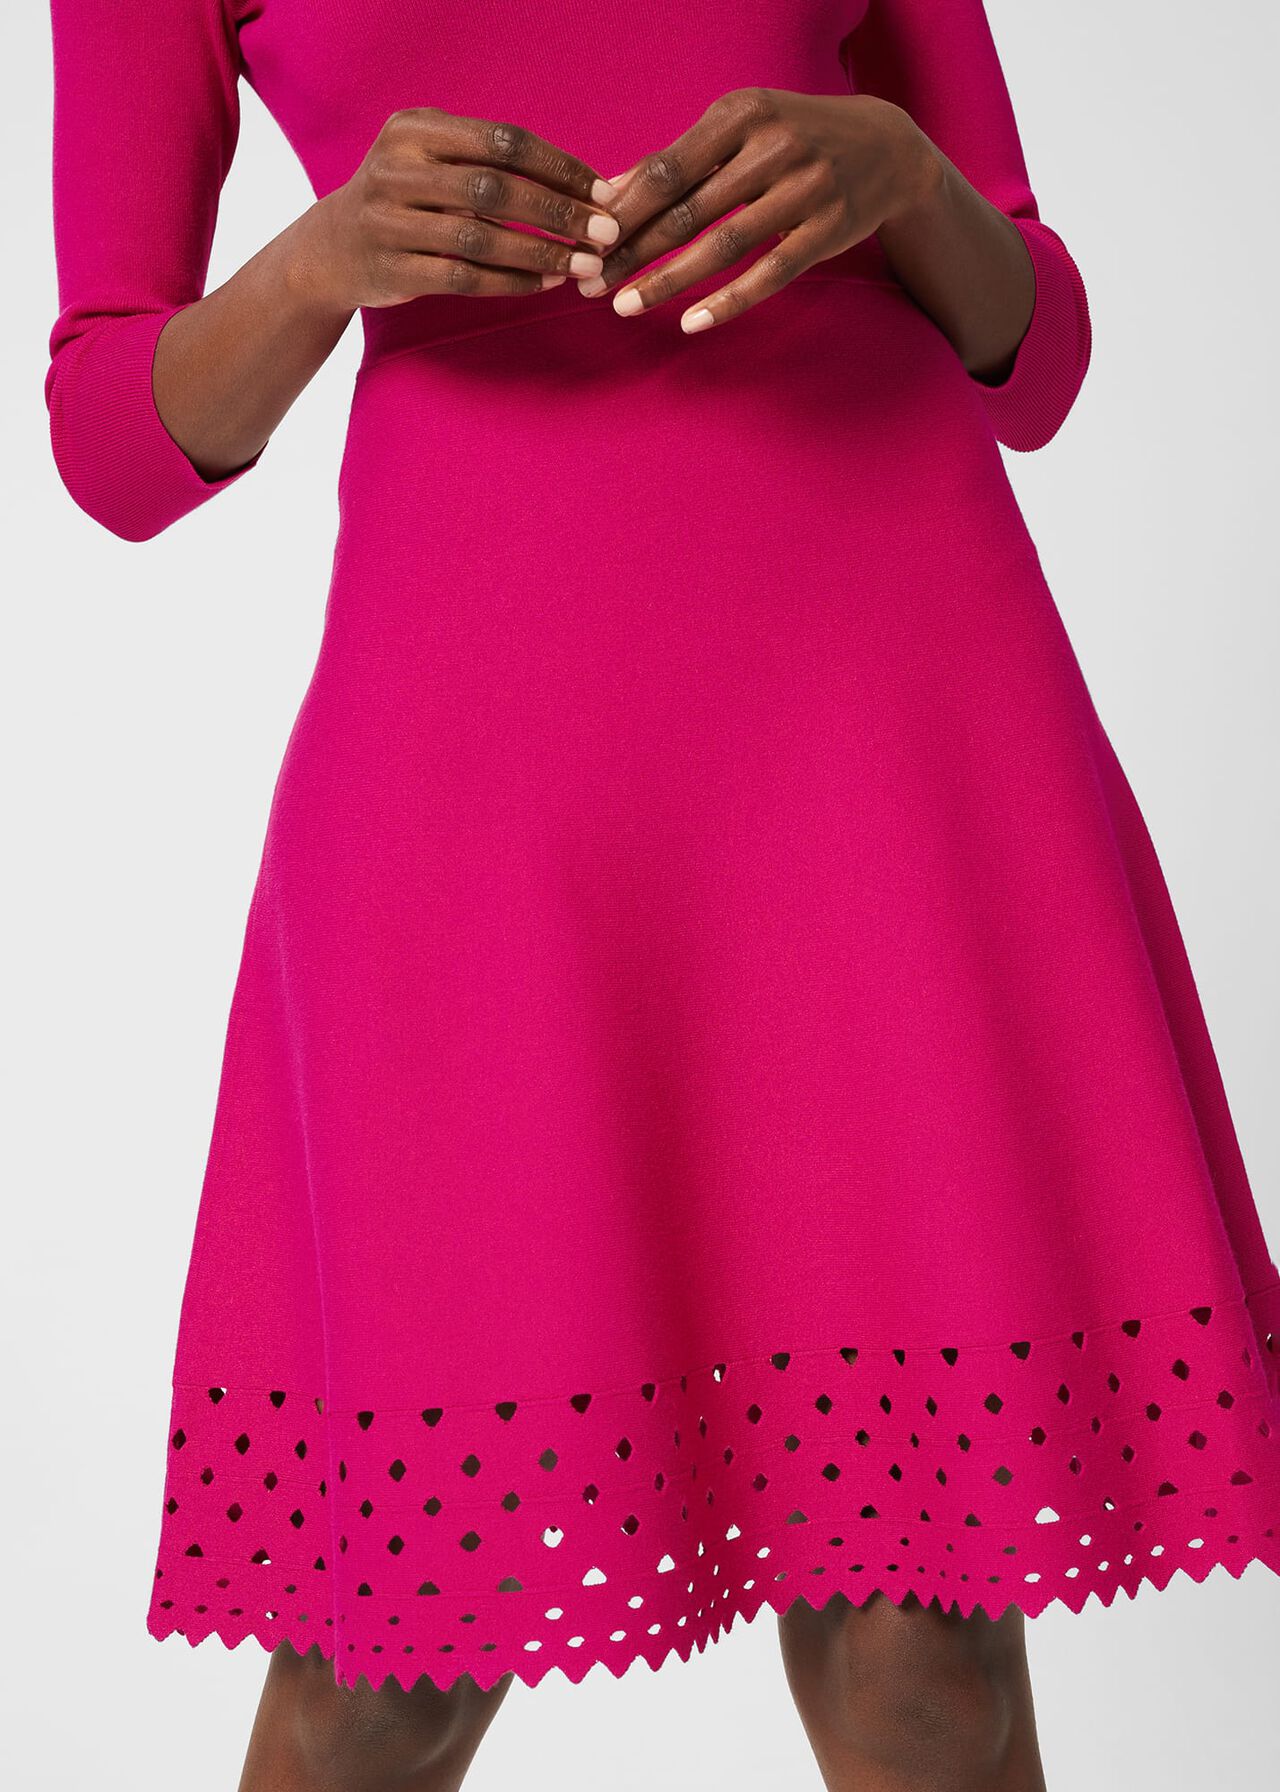 Myra Knitted Dress, Orchid Pink, hi-res